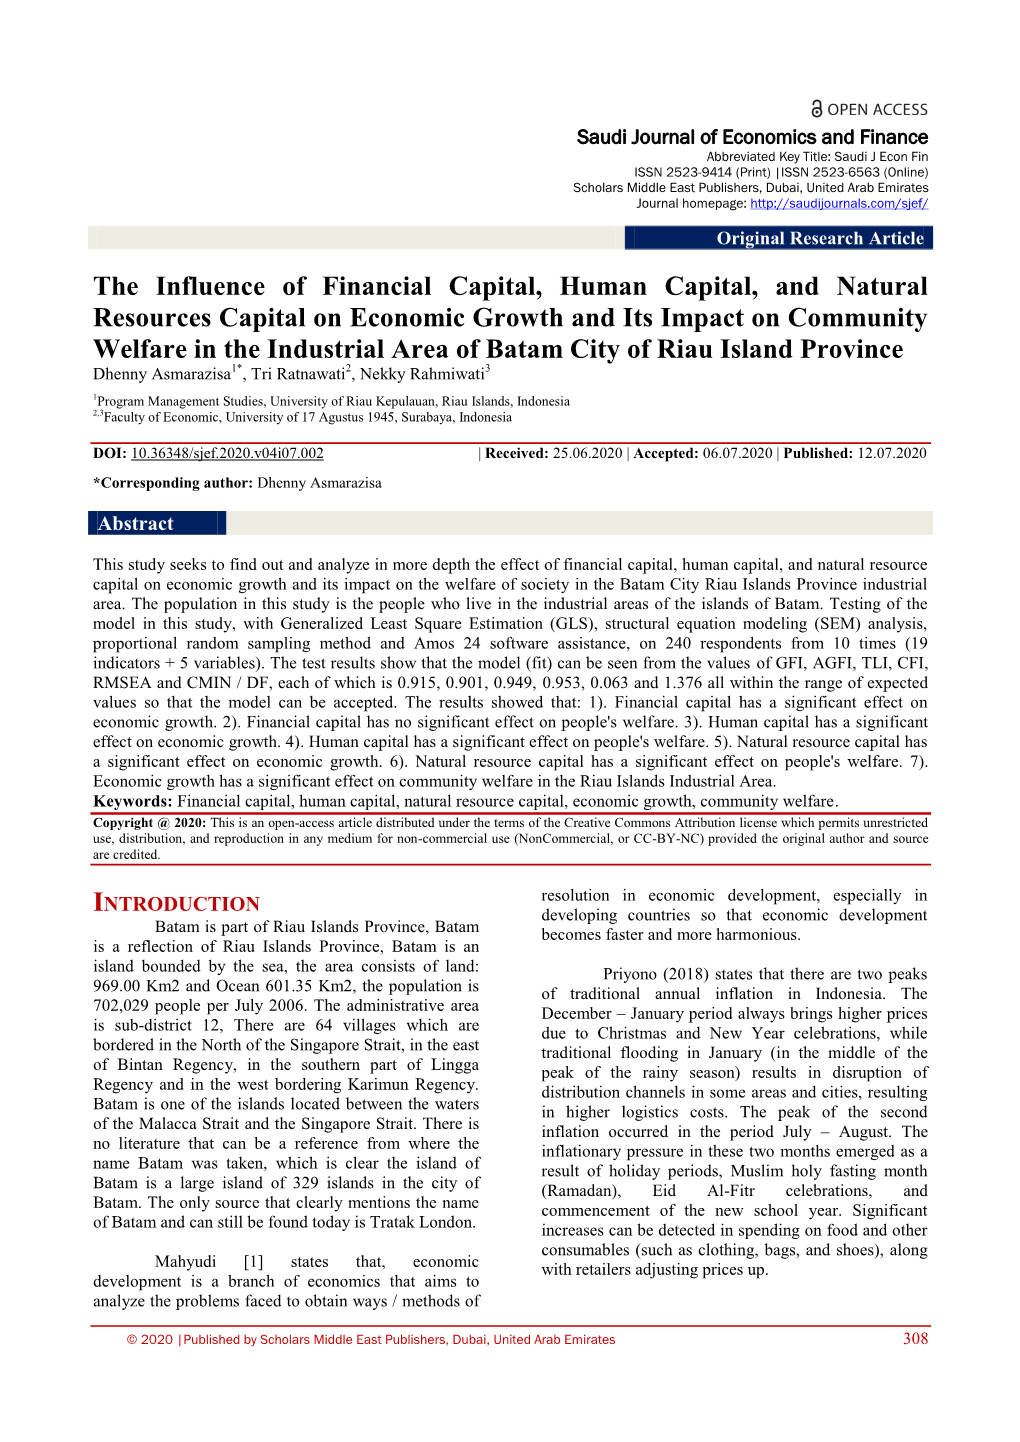 The Influence of Financial Capital, Human Capital, and Natural Resources Capital on Economic Growth and Its Impact on Community